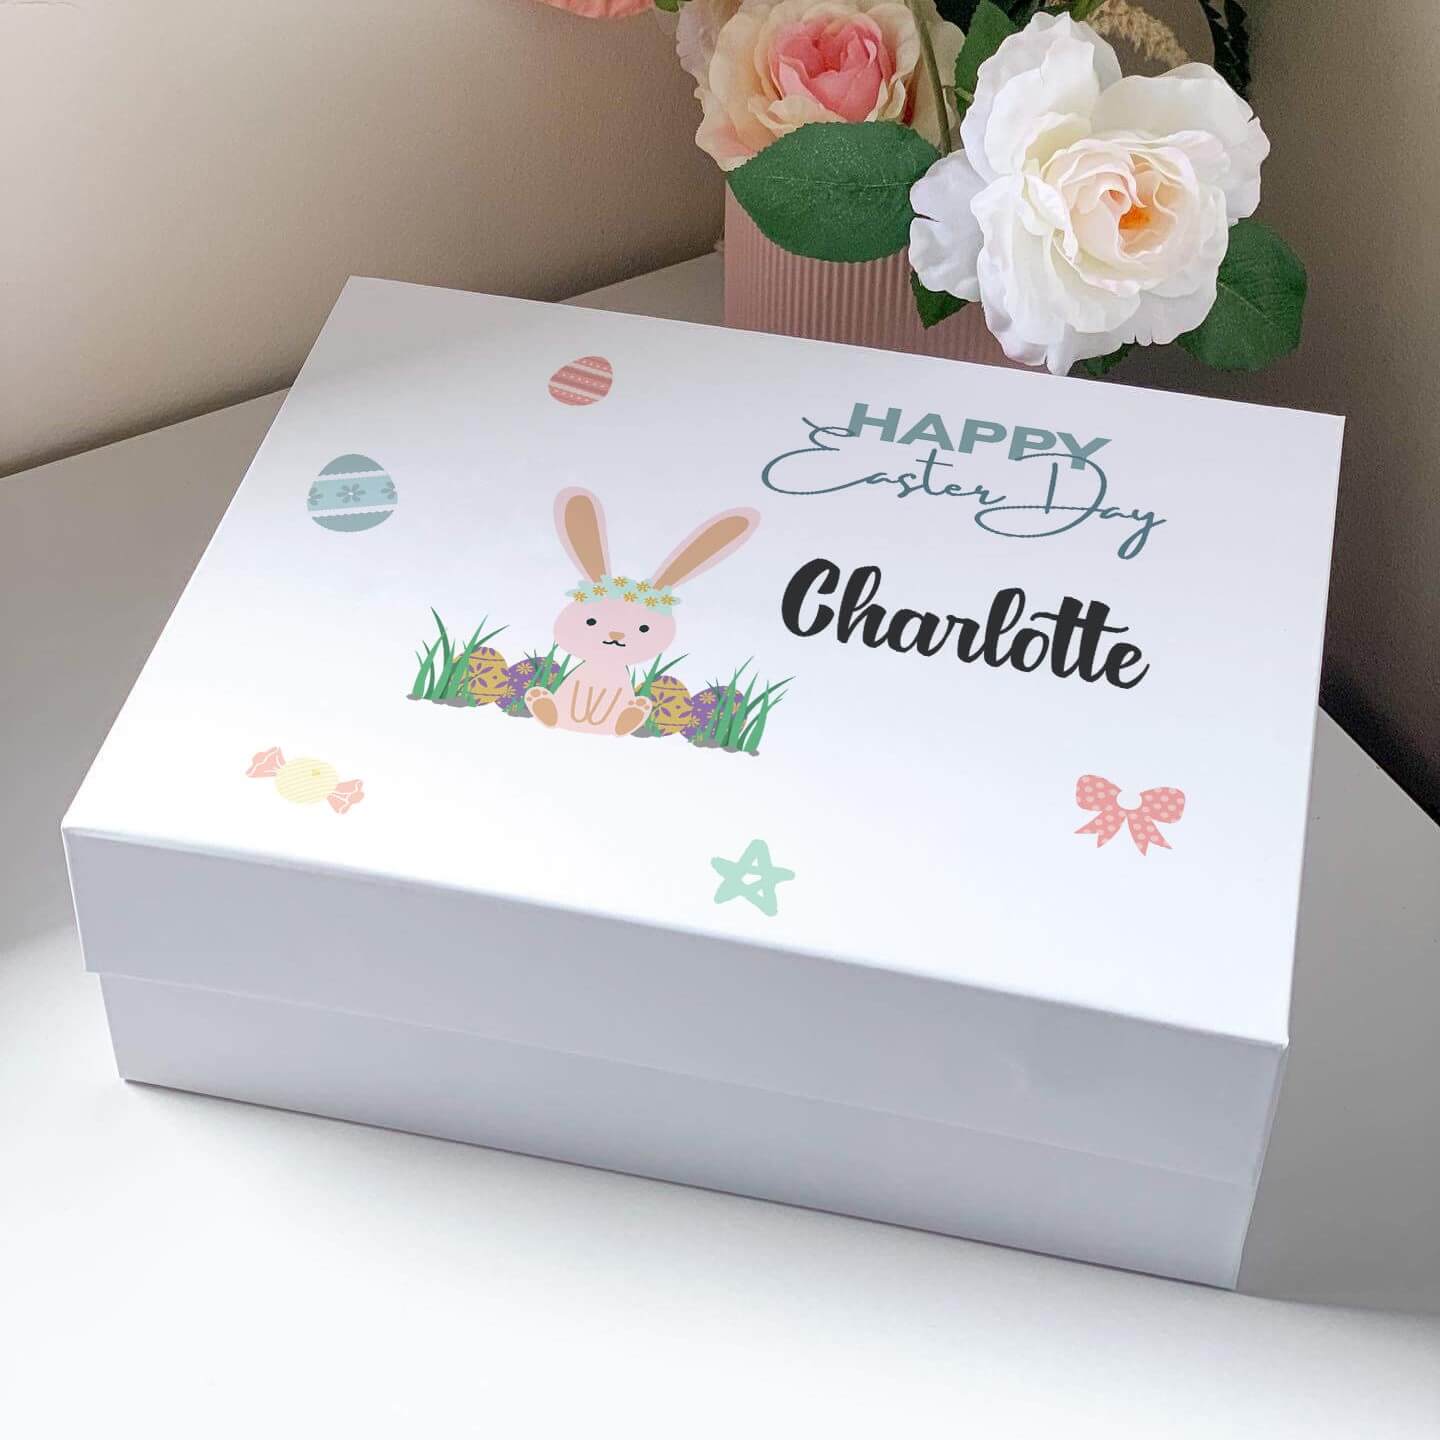 Happy Easter Day Magnetic Closure Gift Box #2